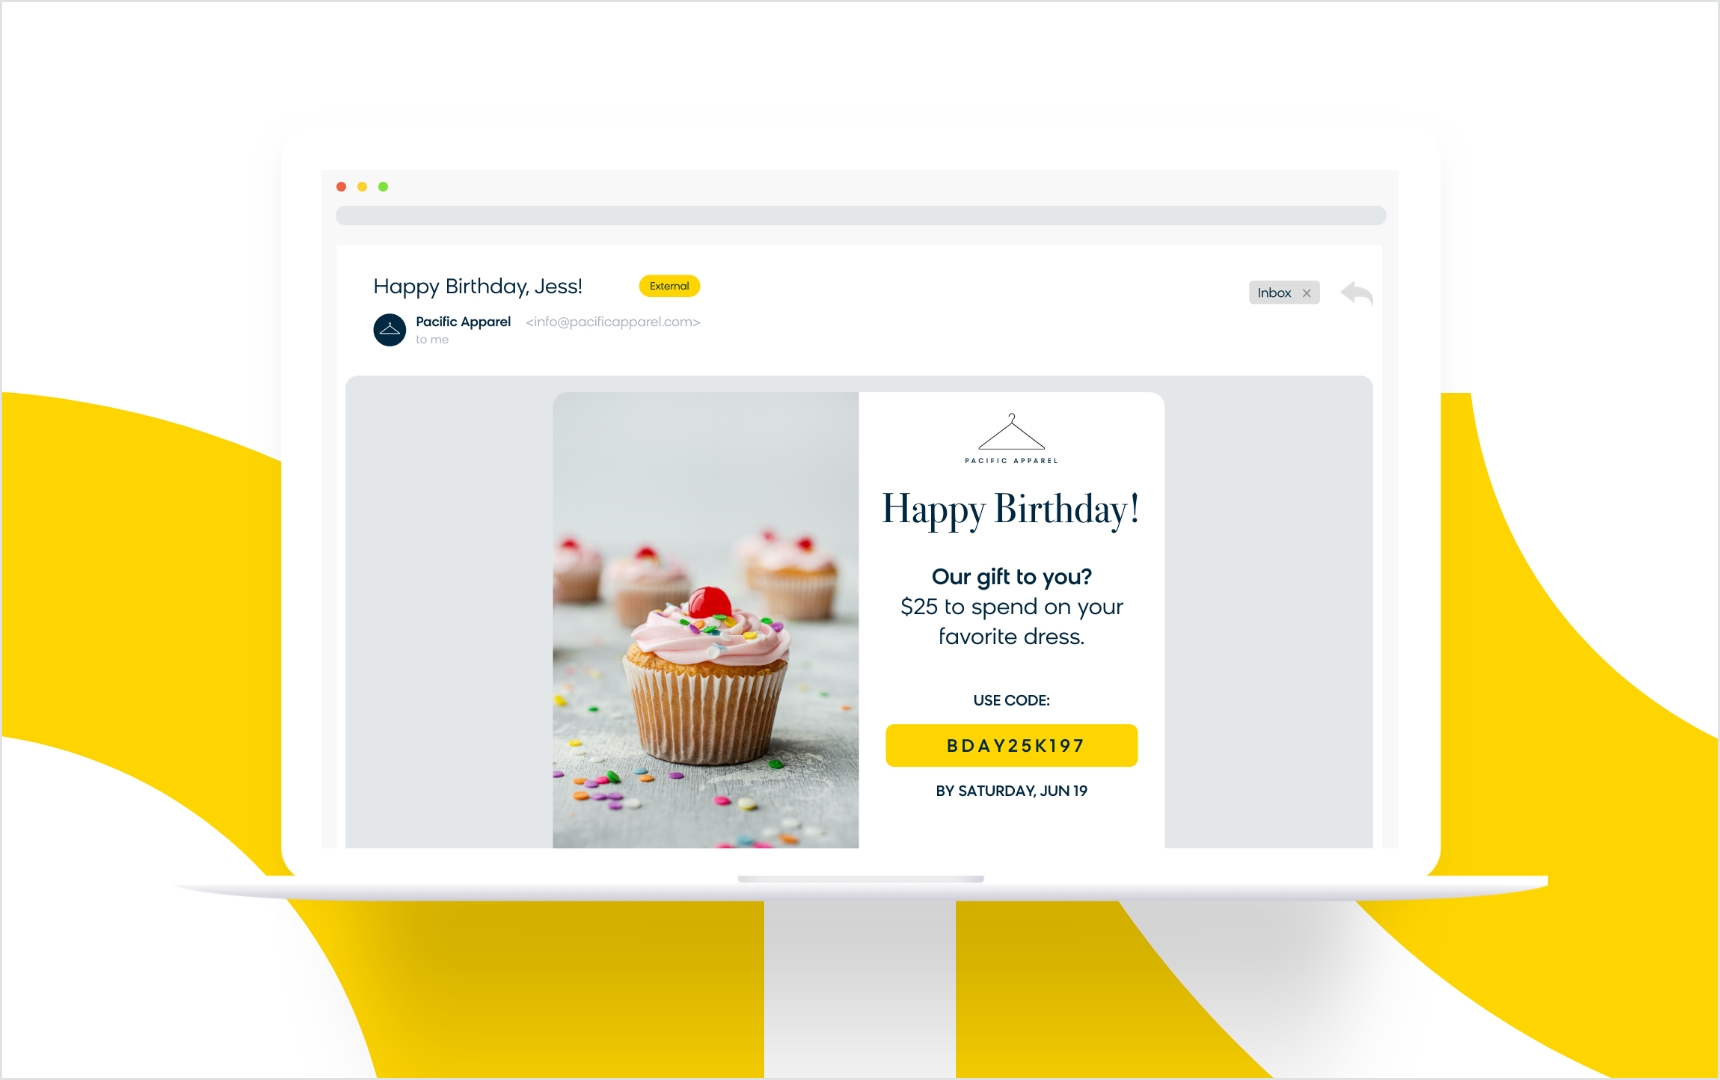 Example of an email with a birthday offer